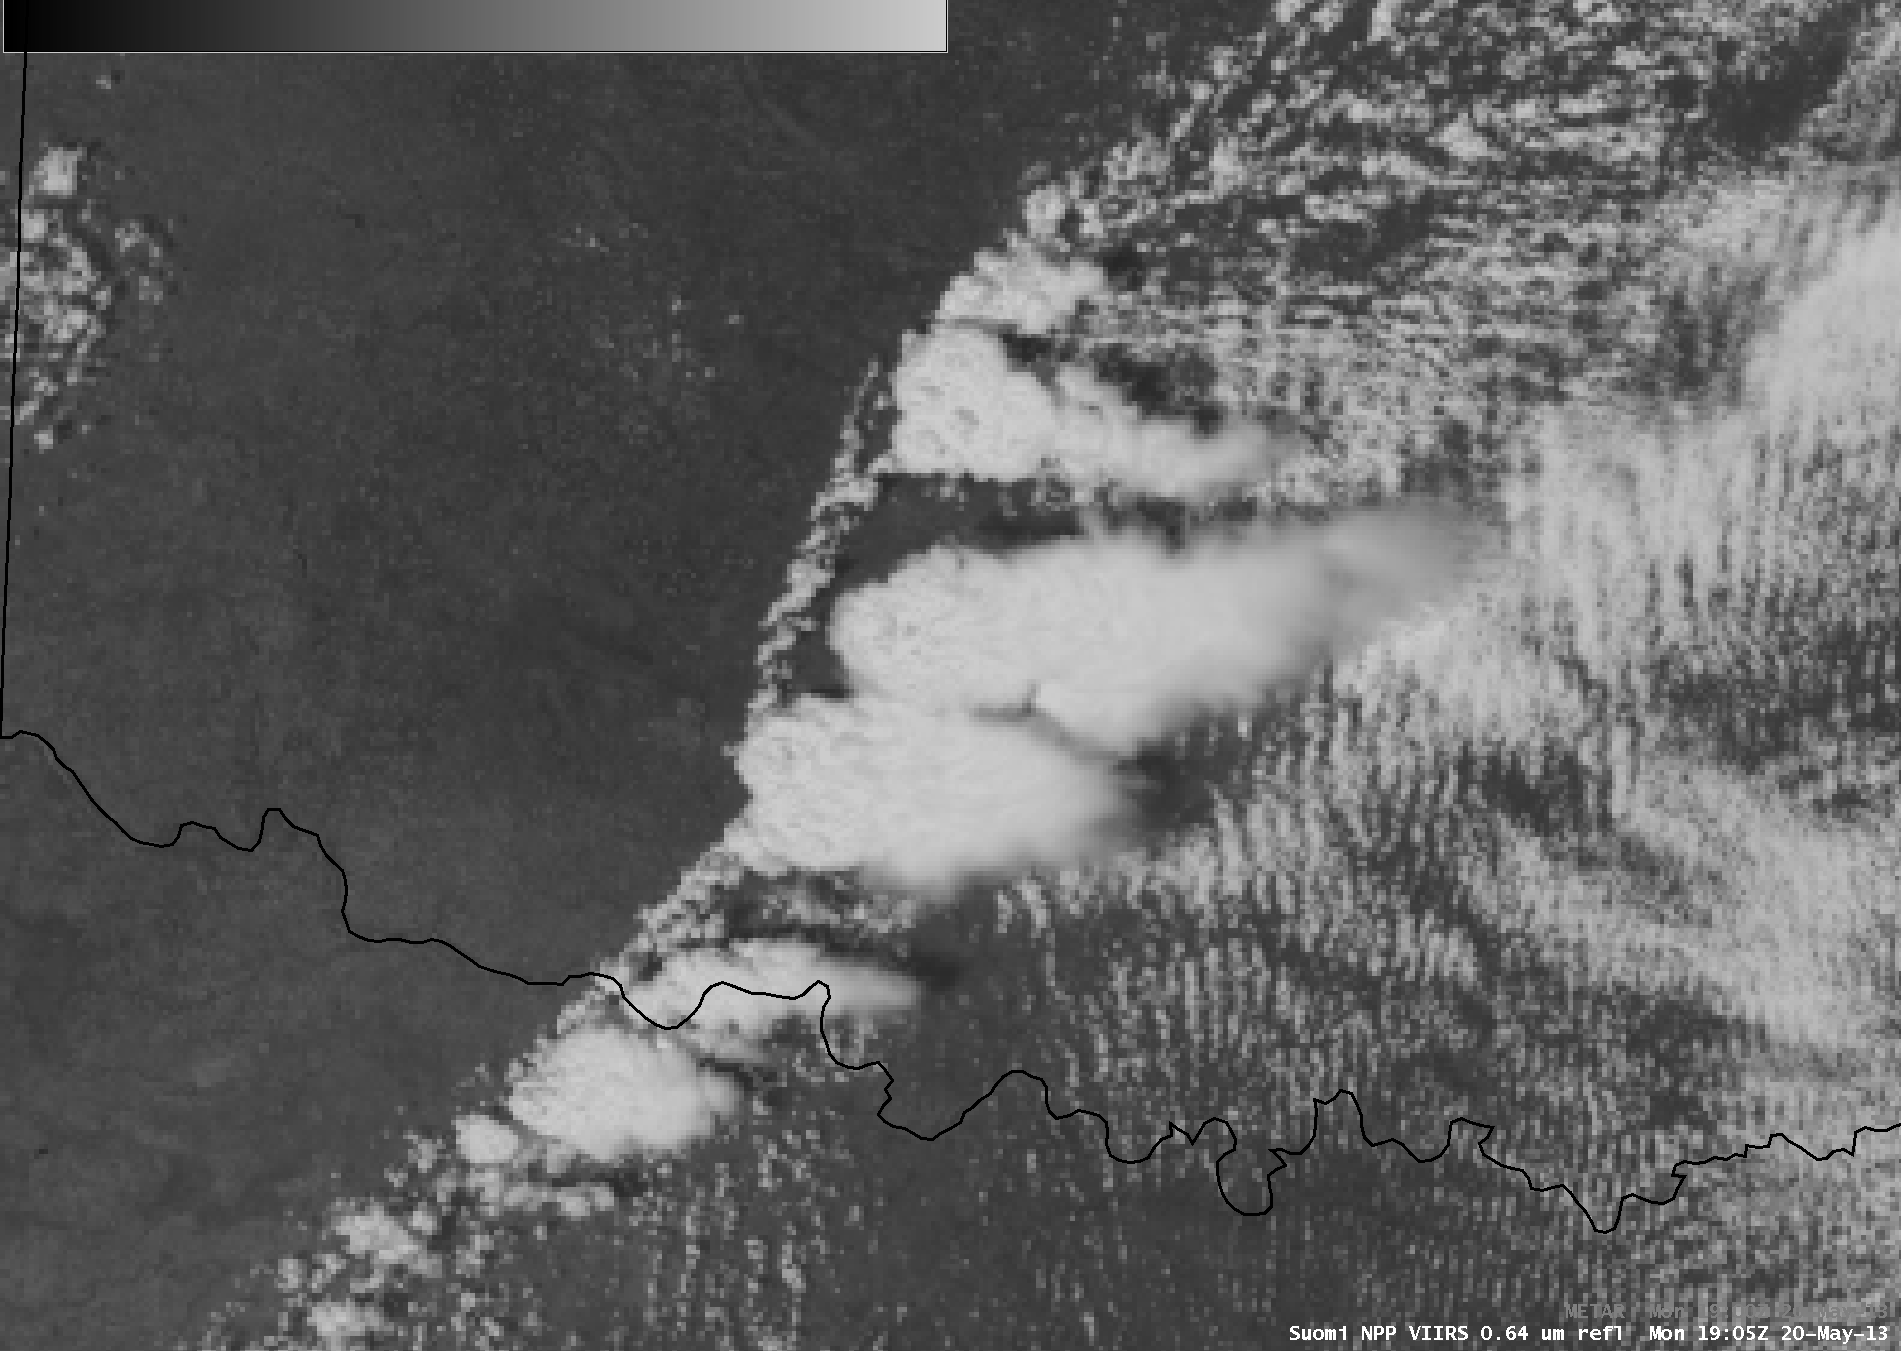 Suomi NPP VIIRS 0.64 Âµm visible channel and 11.45 Âµm IR channel images